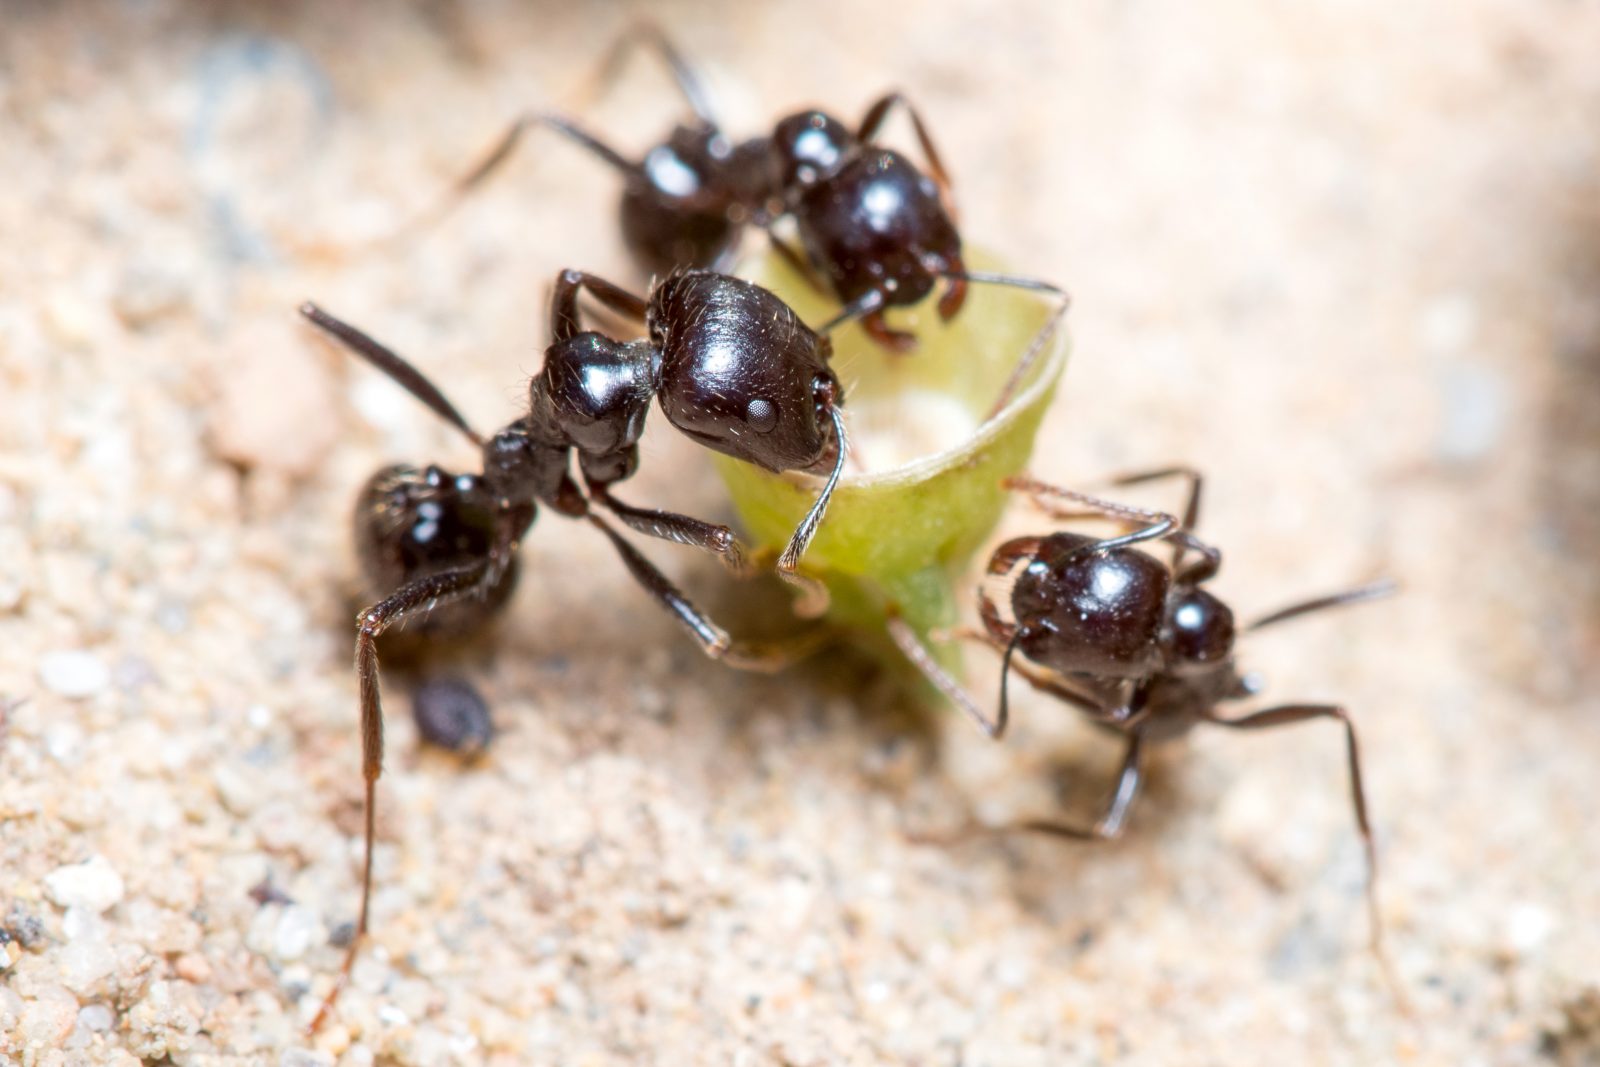 Messor Barbarus harvester ants cutting a green plant. High quality photo